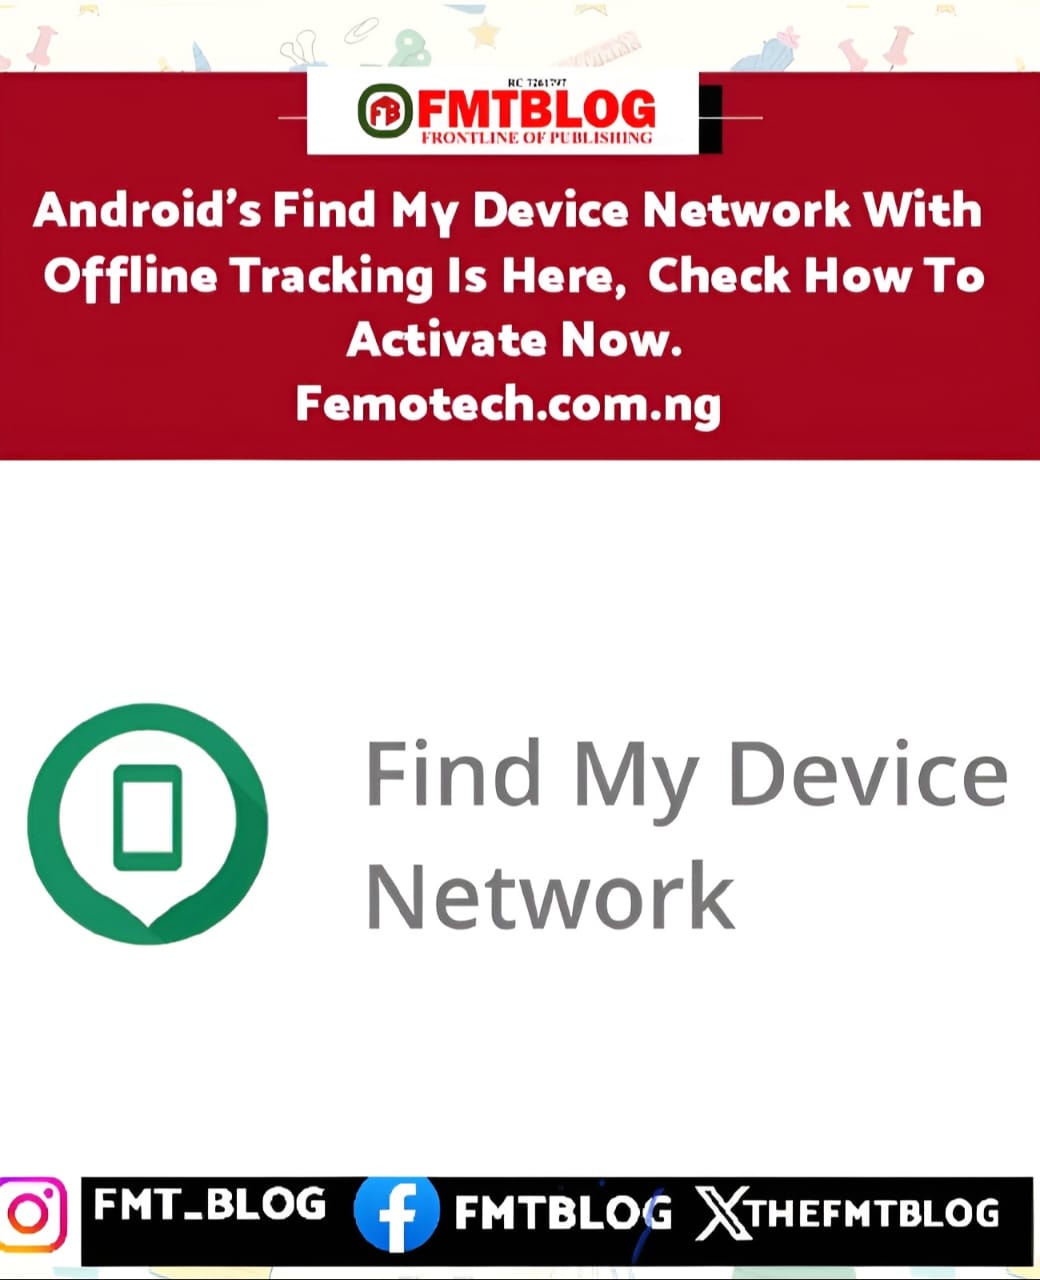 Android’s Find My Device Network With Offline Tracking Is Here, Check How To Activate Now.